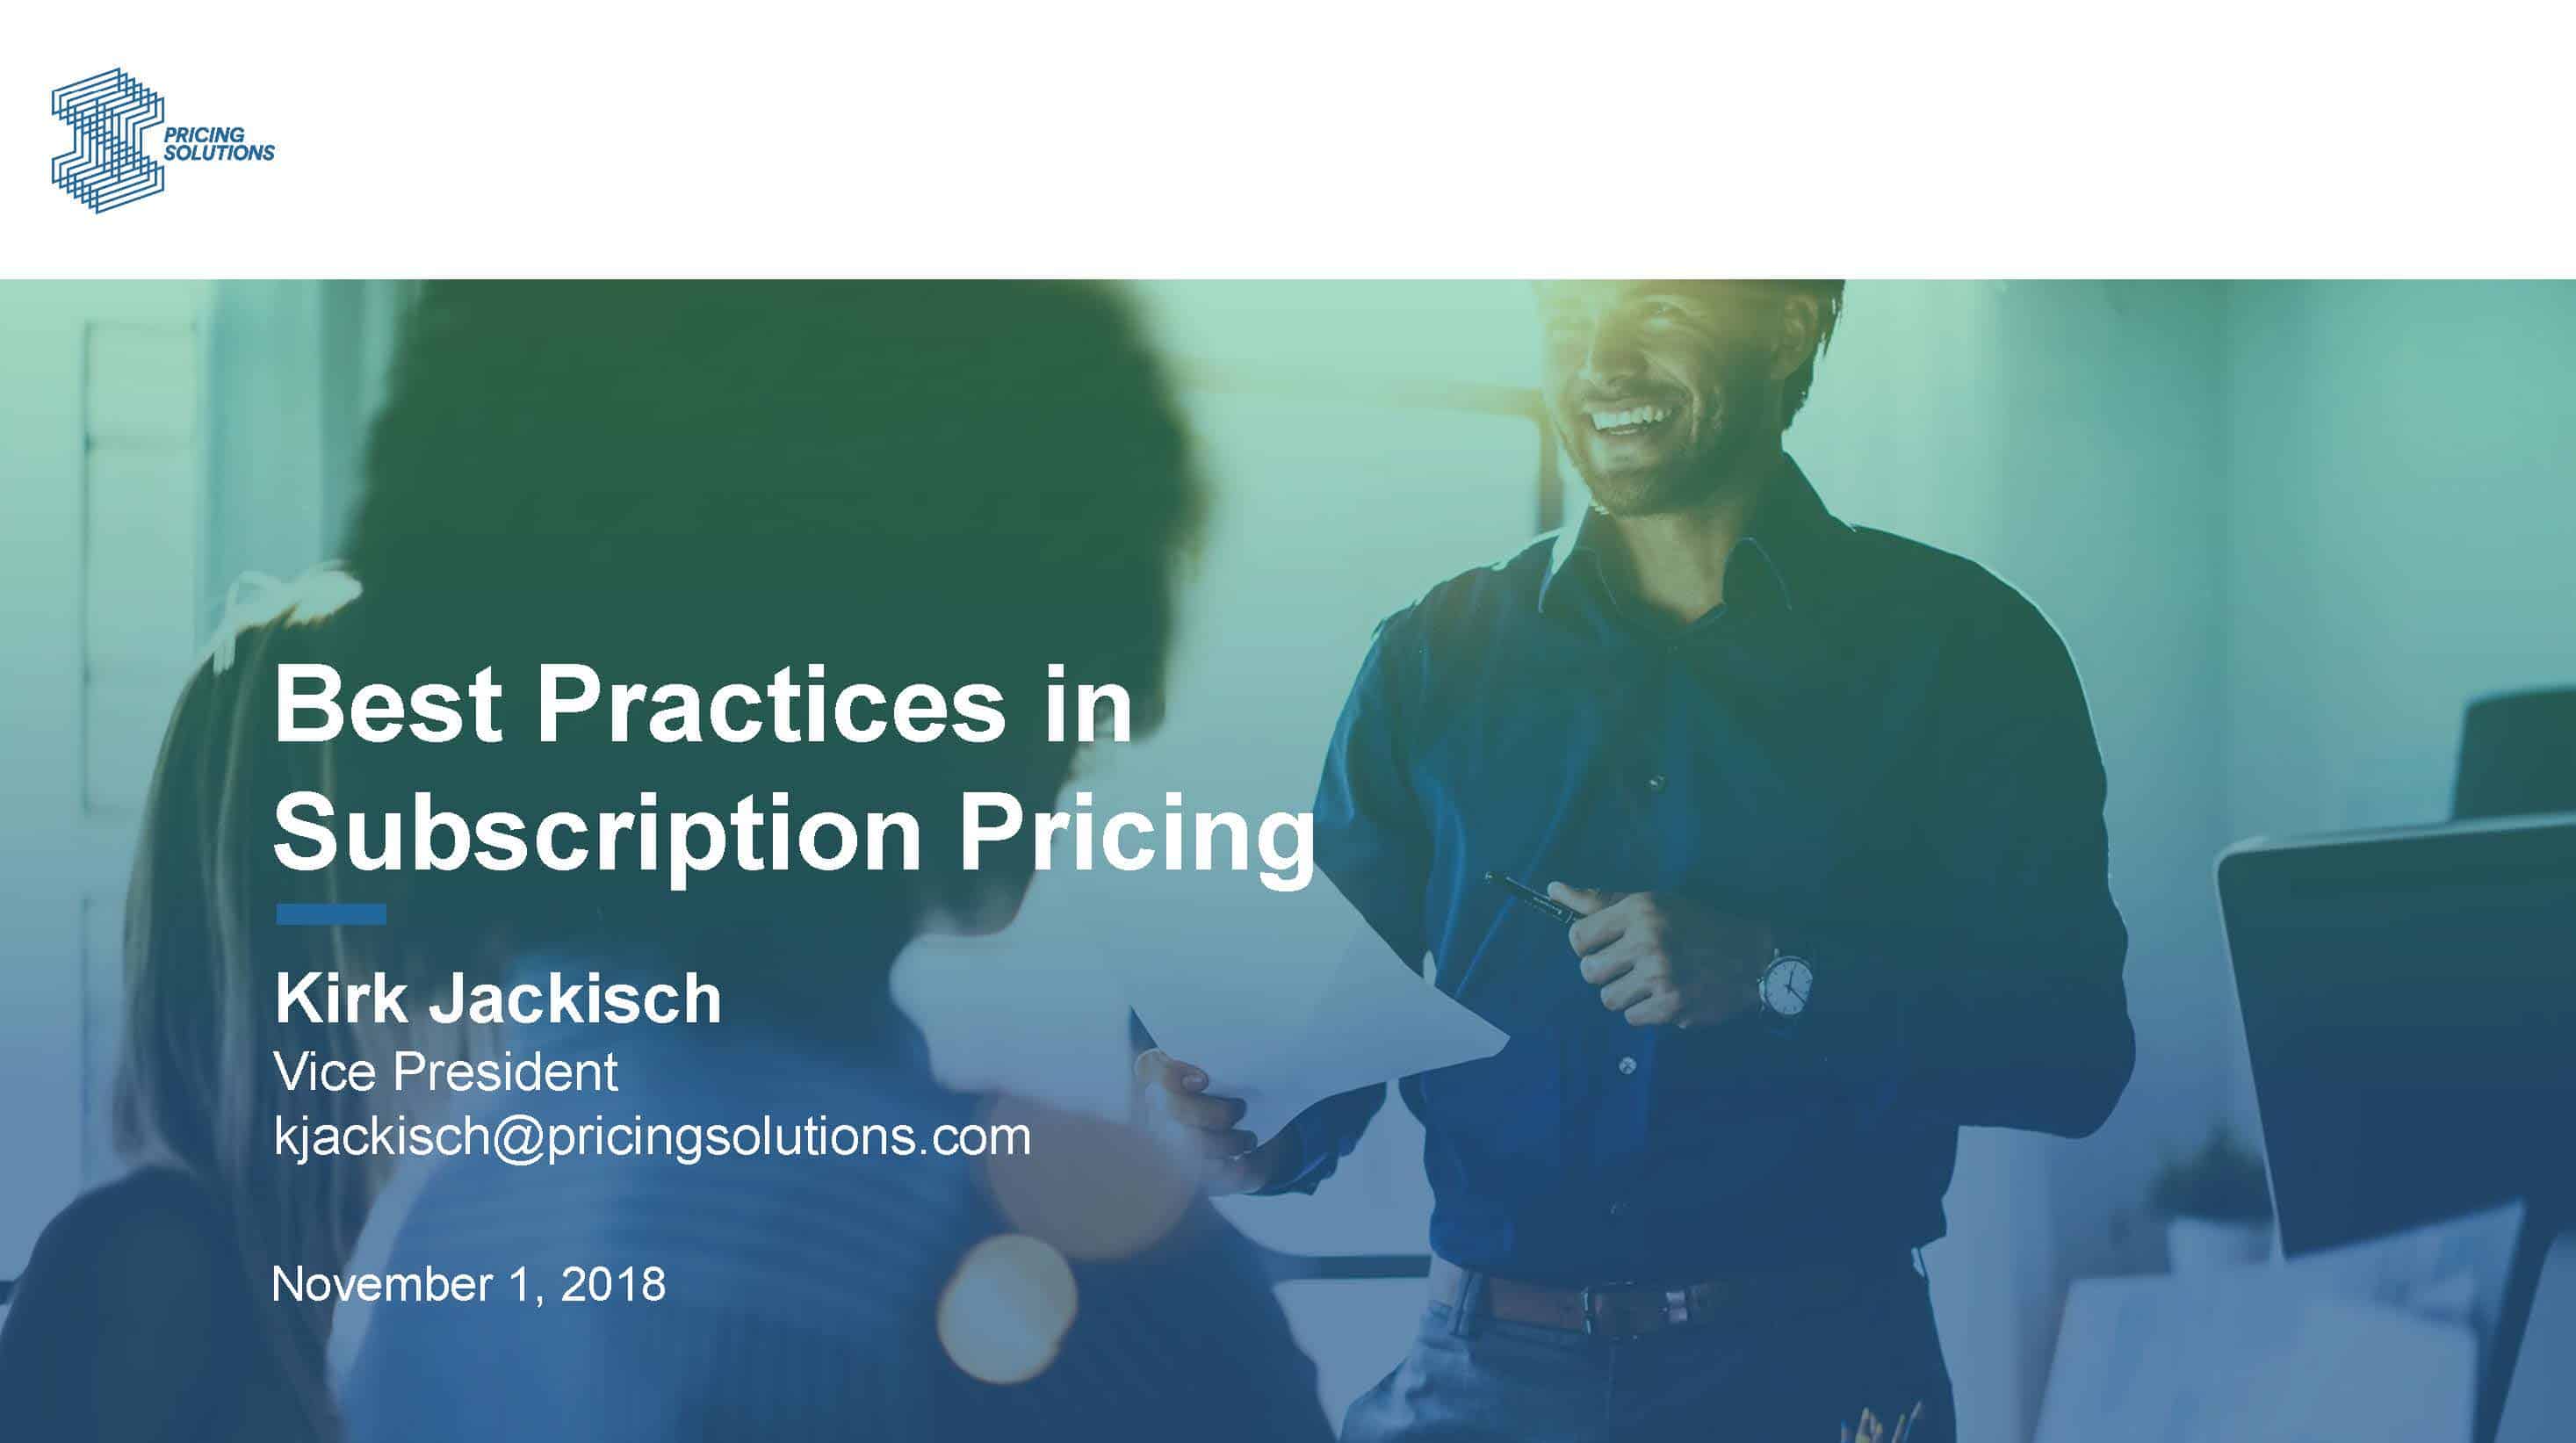 The Best Practices in Subscription Pricing webinar